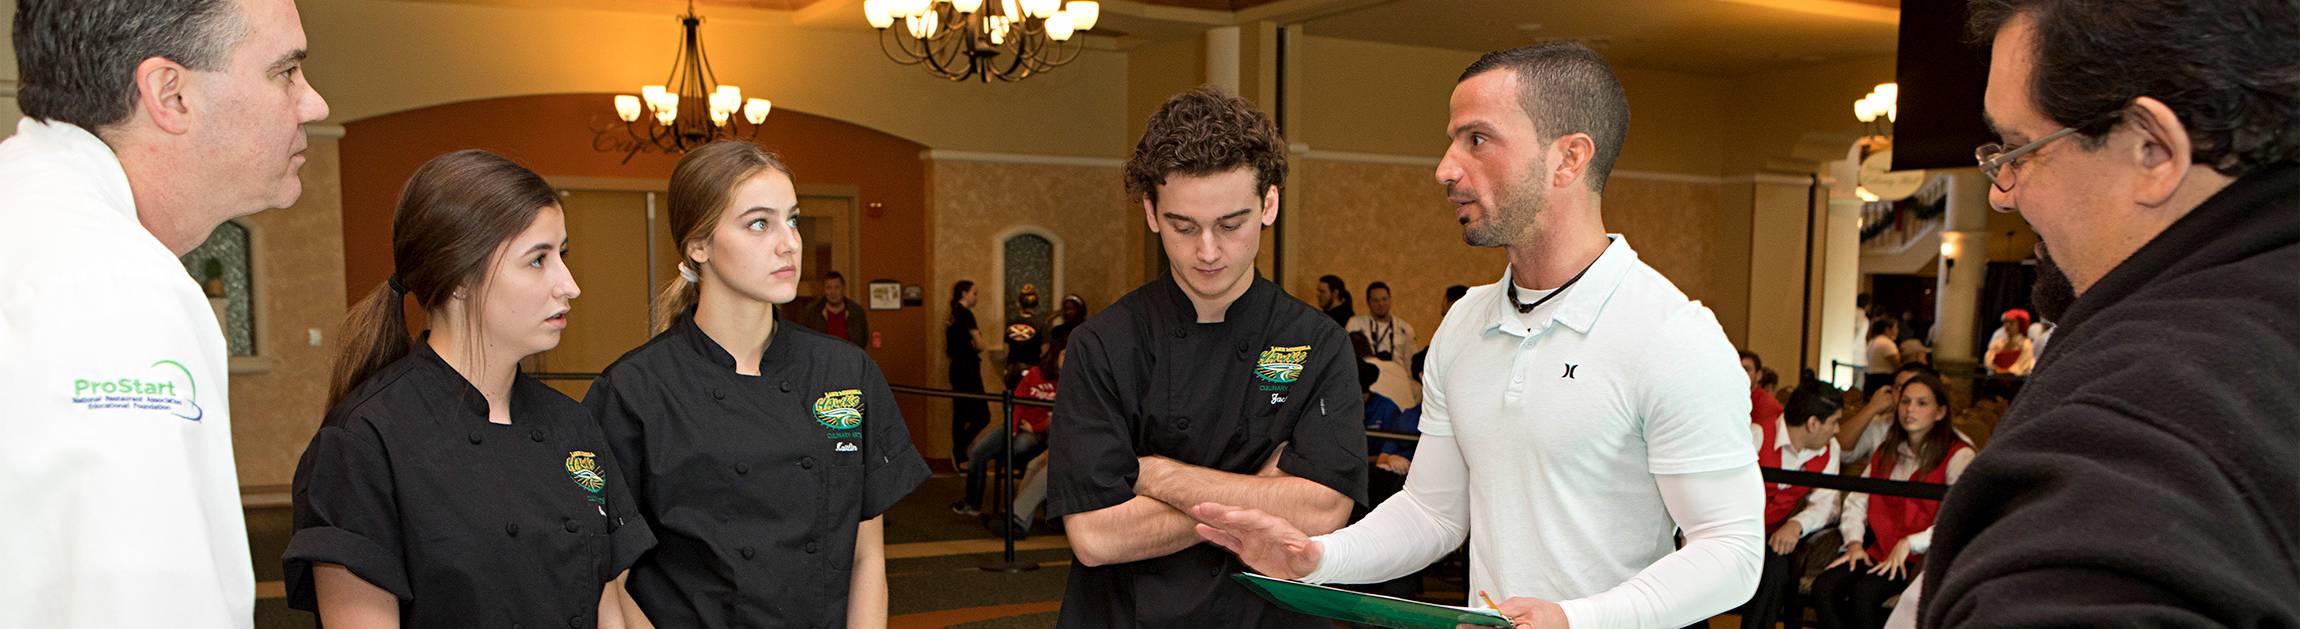 instructor with students at a hospitality event